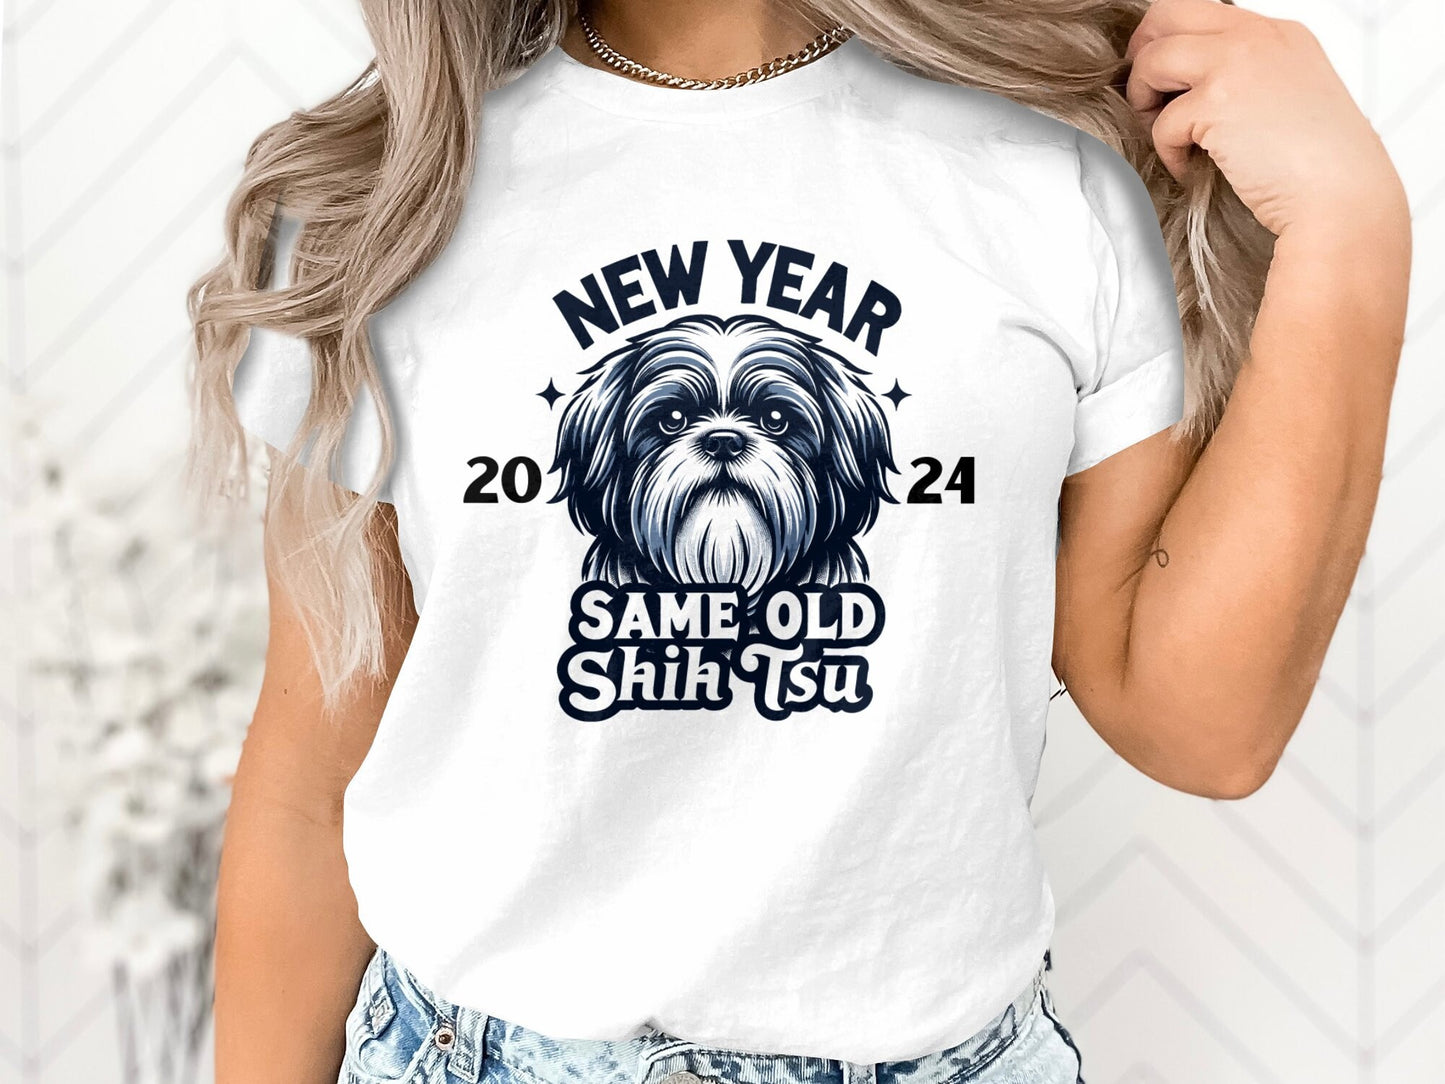 New Year, Same Old Shih Tzu - Funny Dog Lover Shirt, fun new years shirt, 2024 shirt, new years eve outfit, women's graphic tee